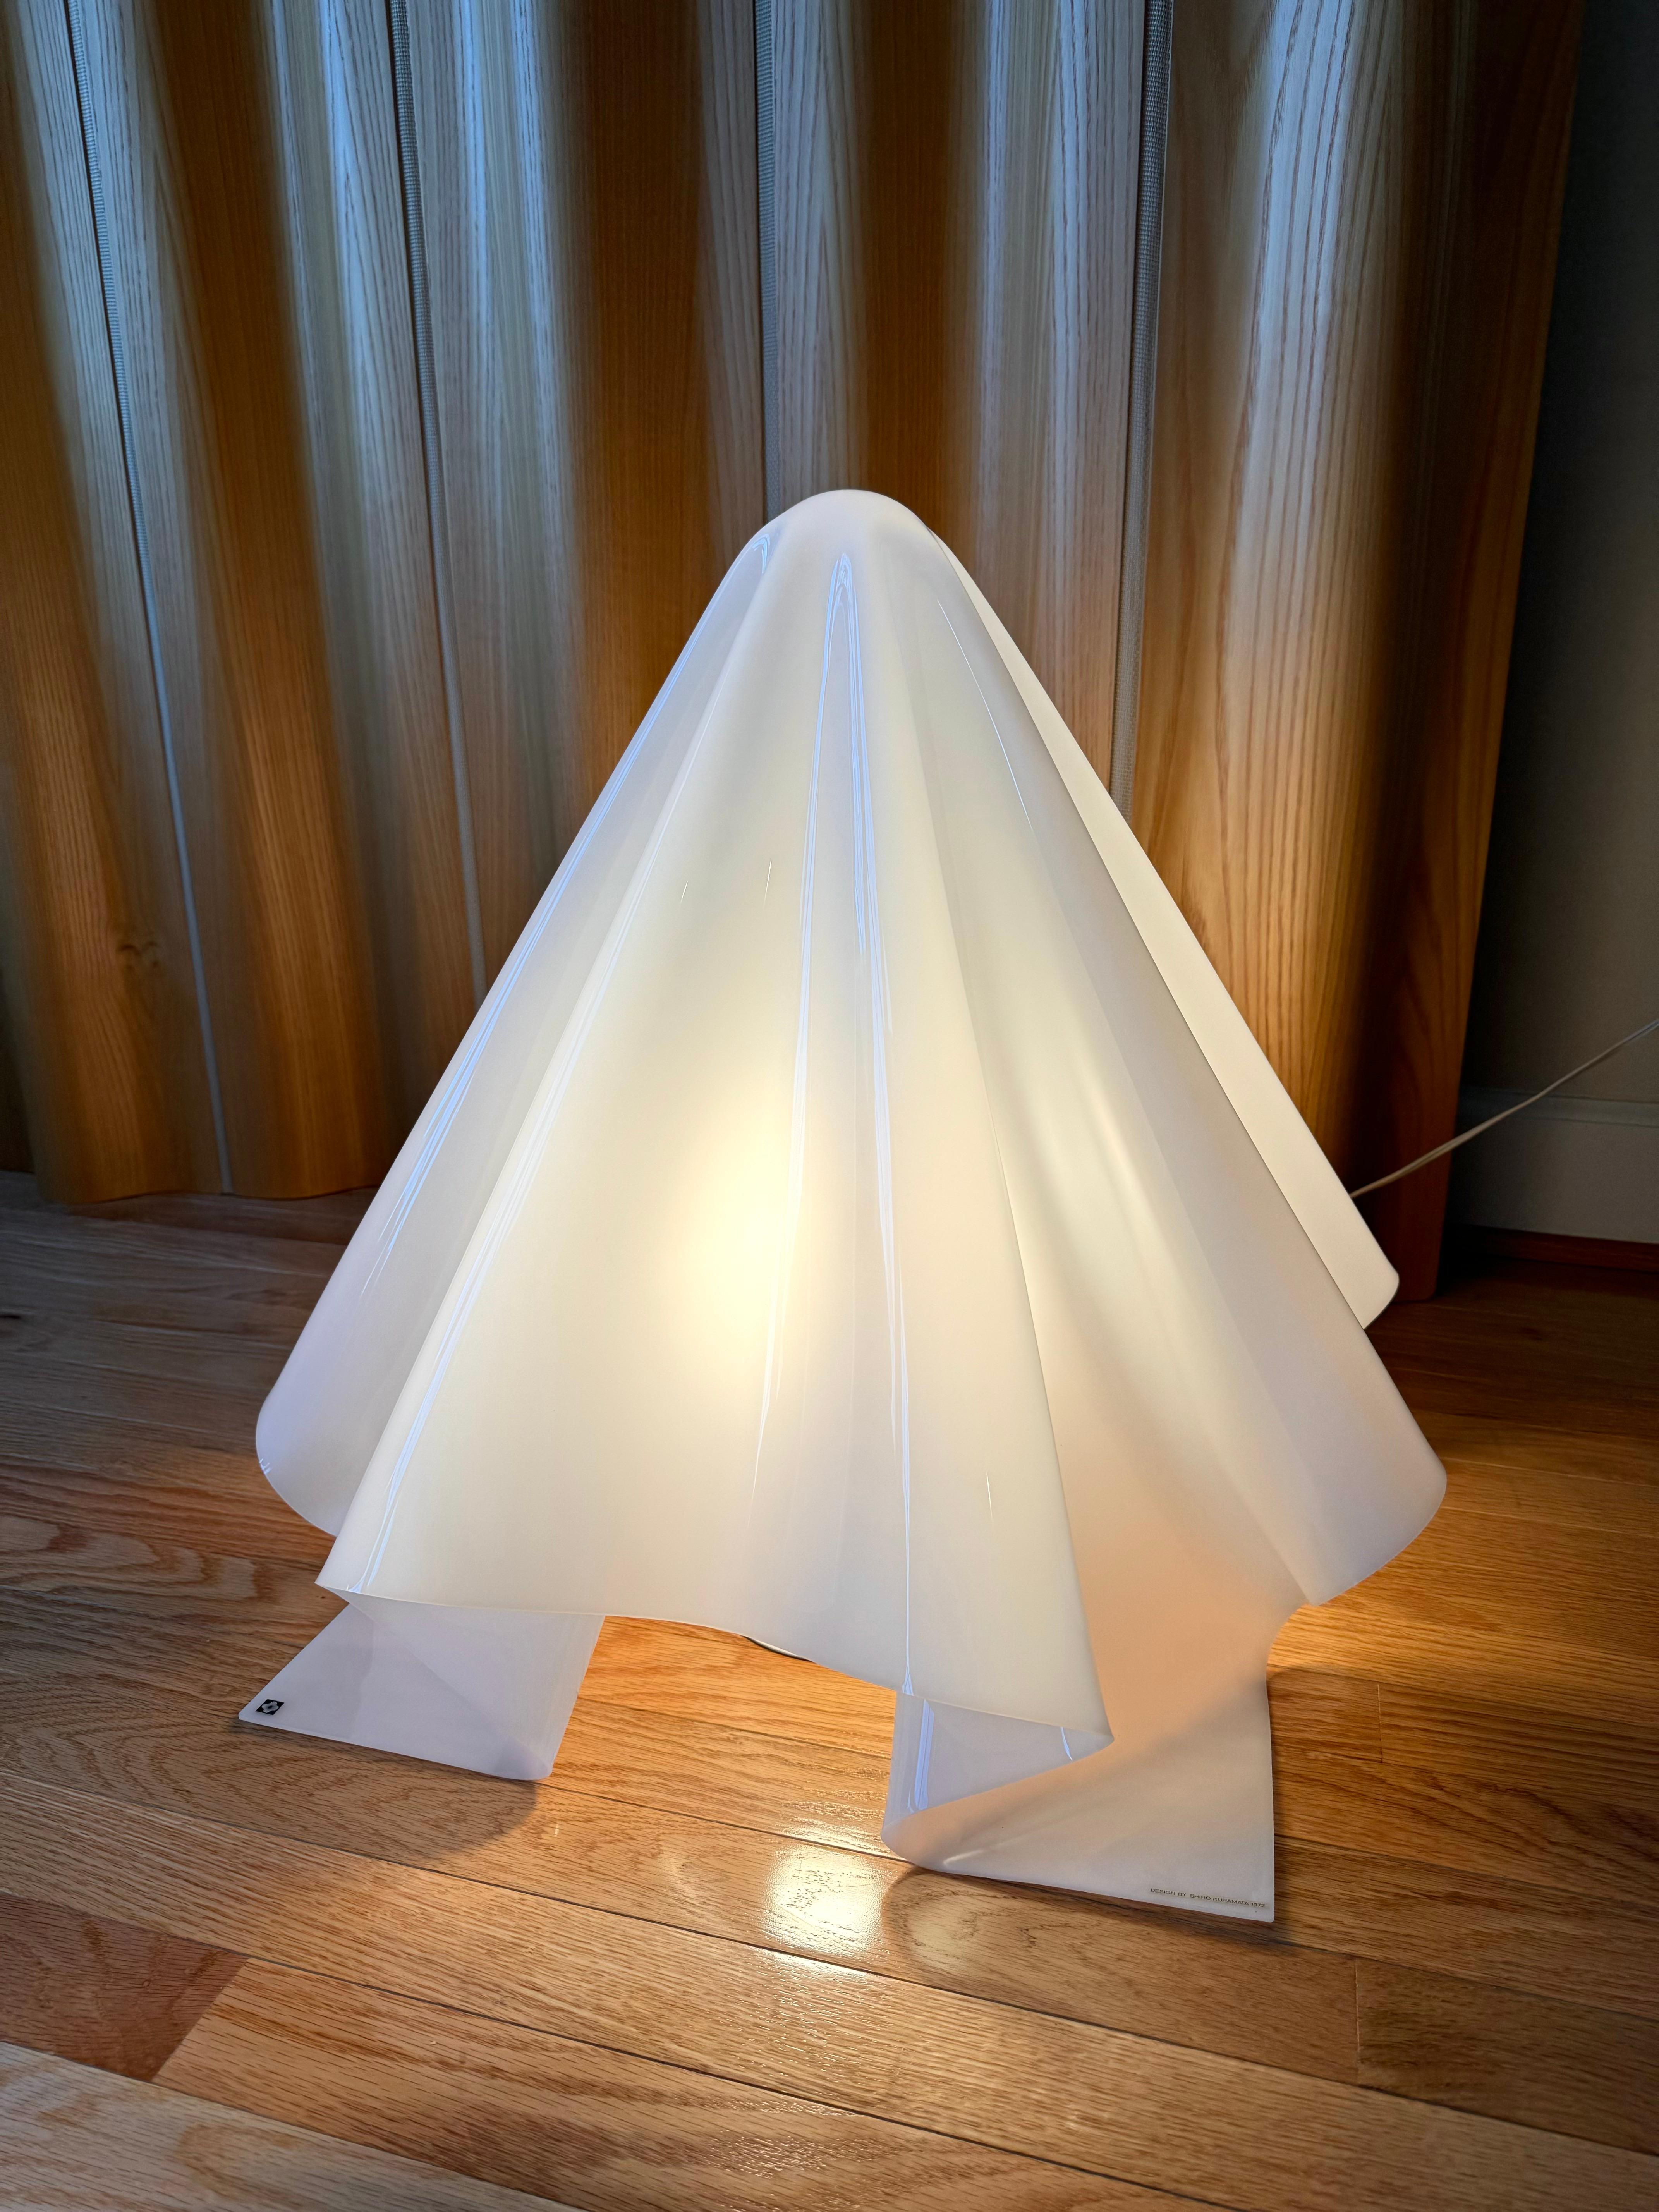 Rare early K-series (Oba- Q/Ghost) table lamp by Shiro Kuramata (Large) In Good Condition For Sale In Centreville, VA